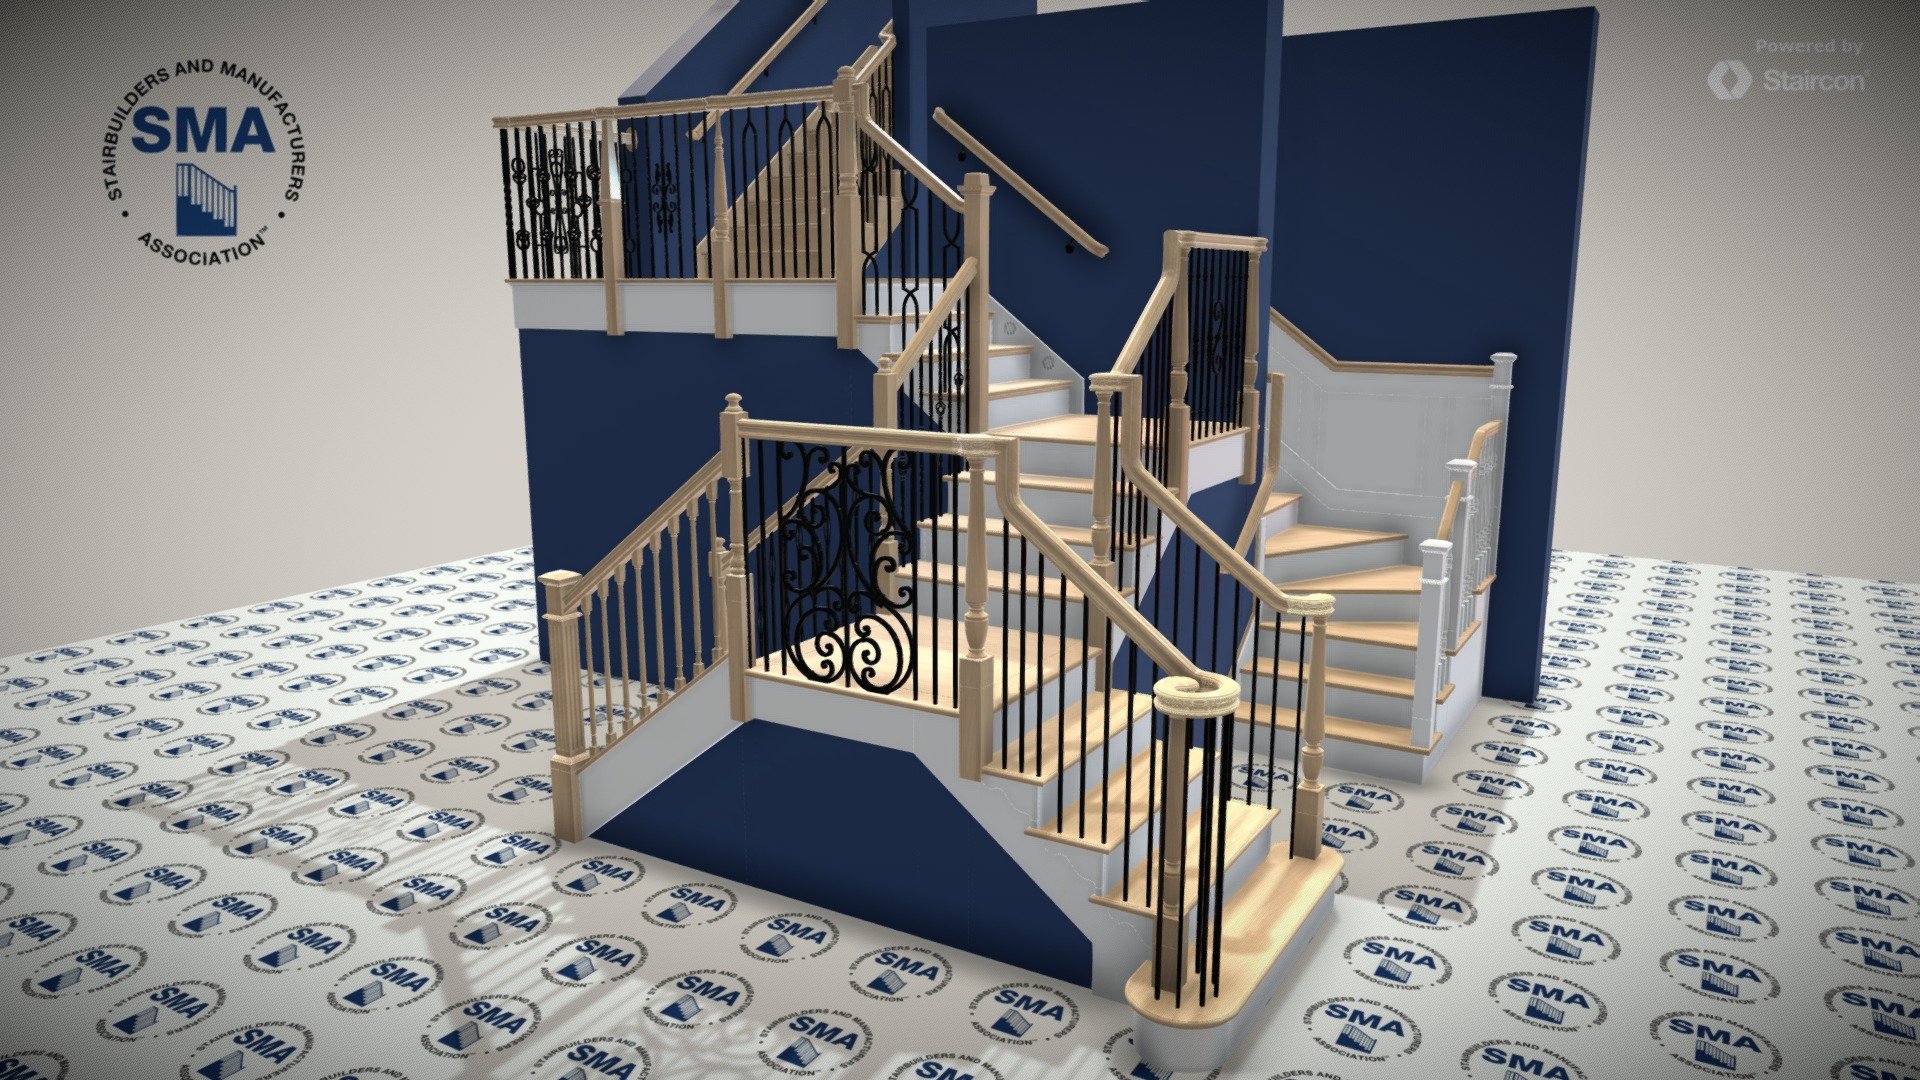 Stair Terminology and Types - Industrial stairs glossary by Erectastep